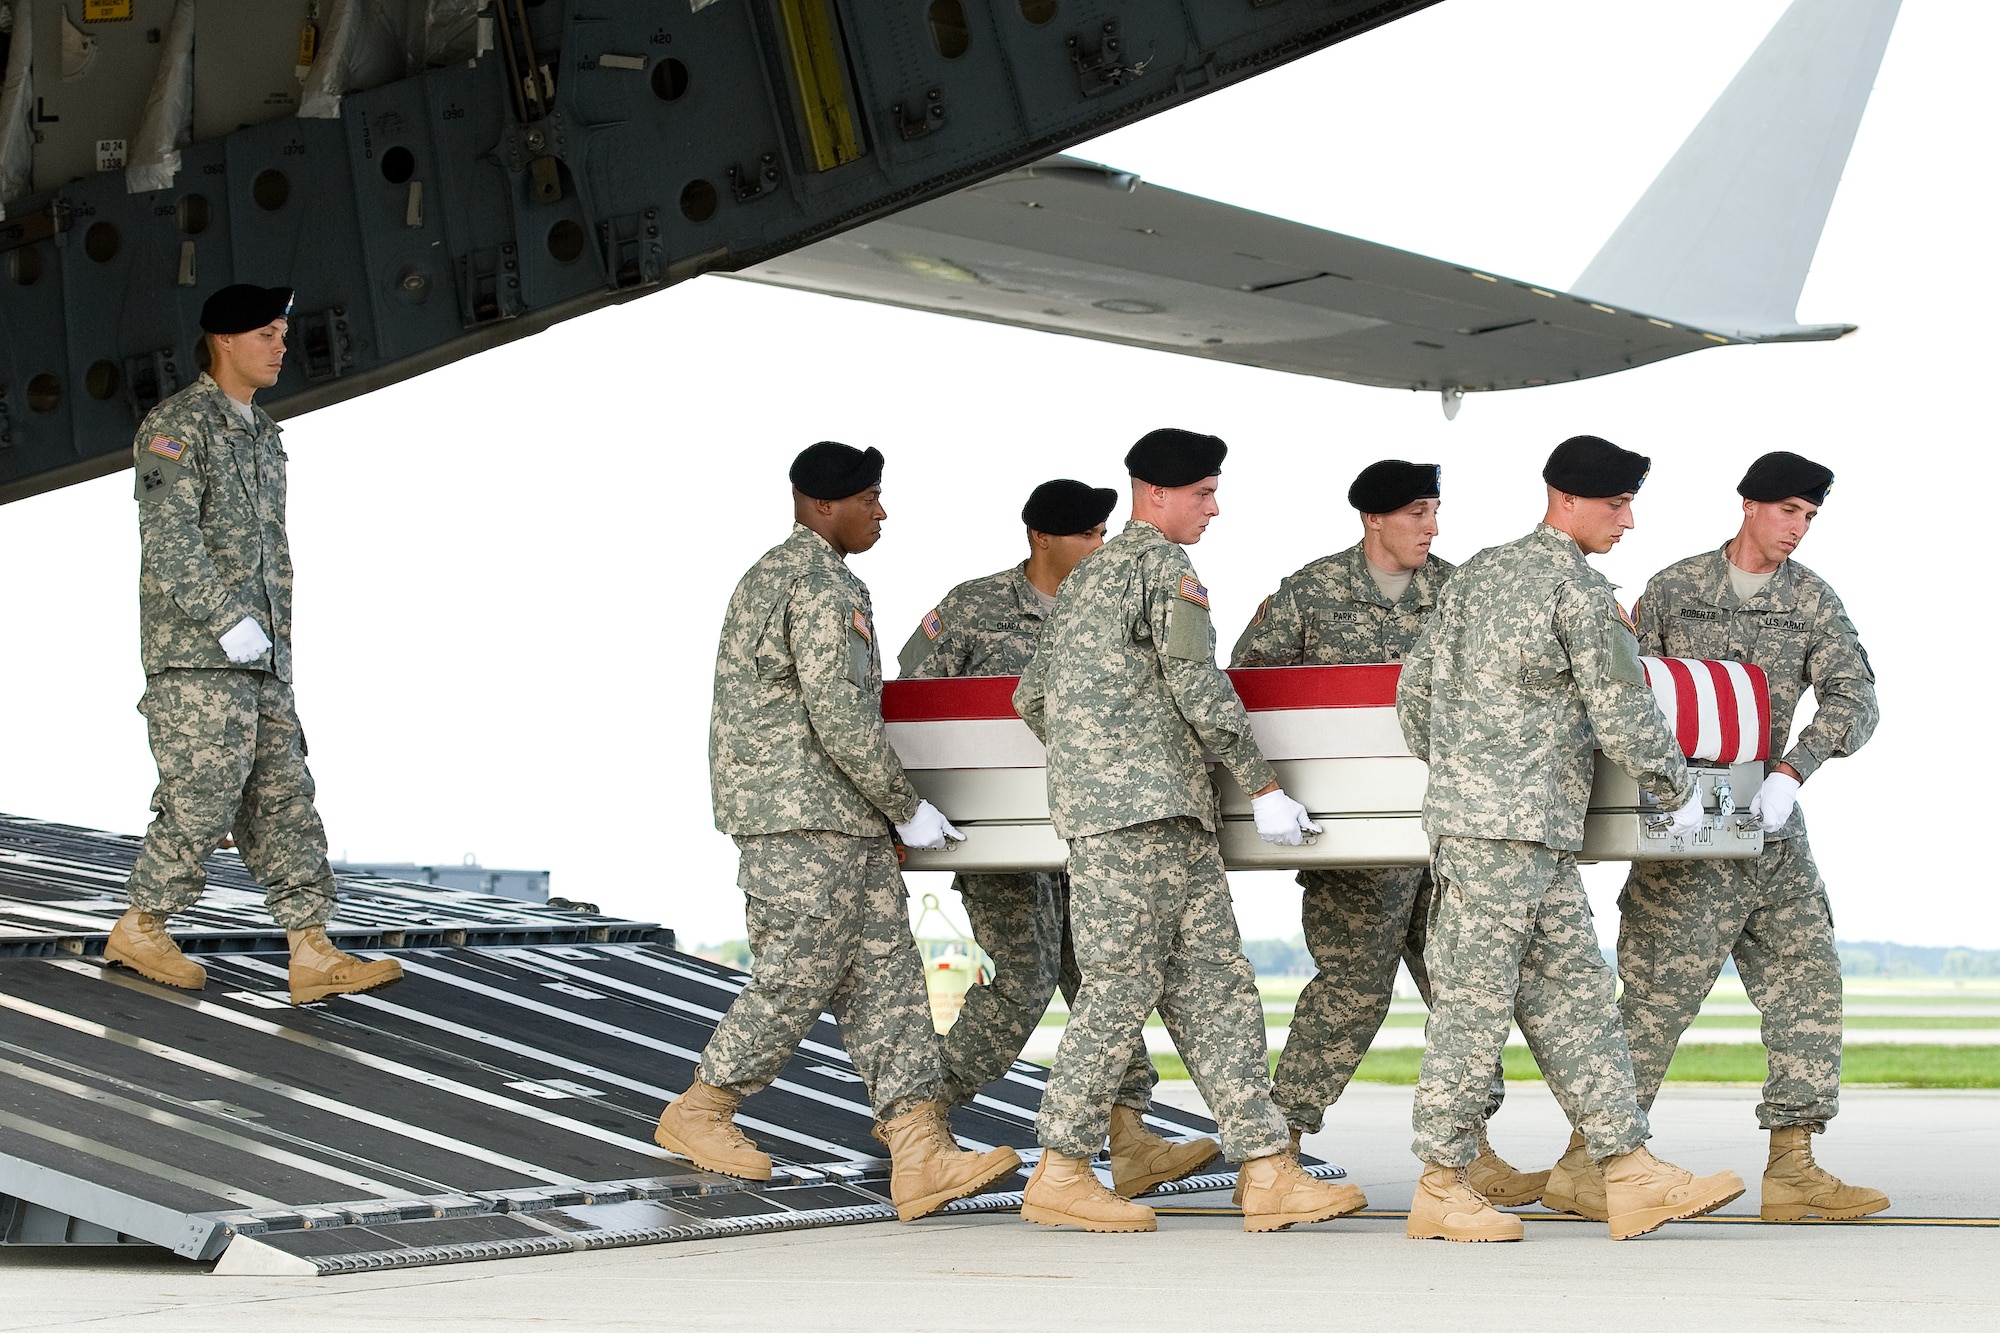 A U.S. Army carry team transfers the remains of Army Staff Sgt. Girard D. Gass Jr. of Lumber Bridge, N.C. during a dignified transfer Aug. 4, 2014 at Dover Air Force Base, Del. Gass was assigned to the 1st Battalion, 3rd Special Forces Group, Fort Bragg, N.C. (U.S. Air Force photo/Roland Balik)